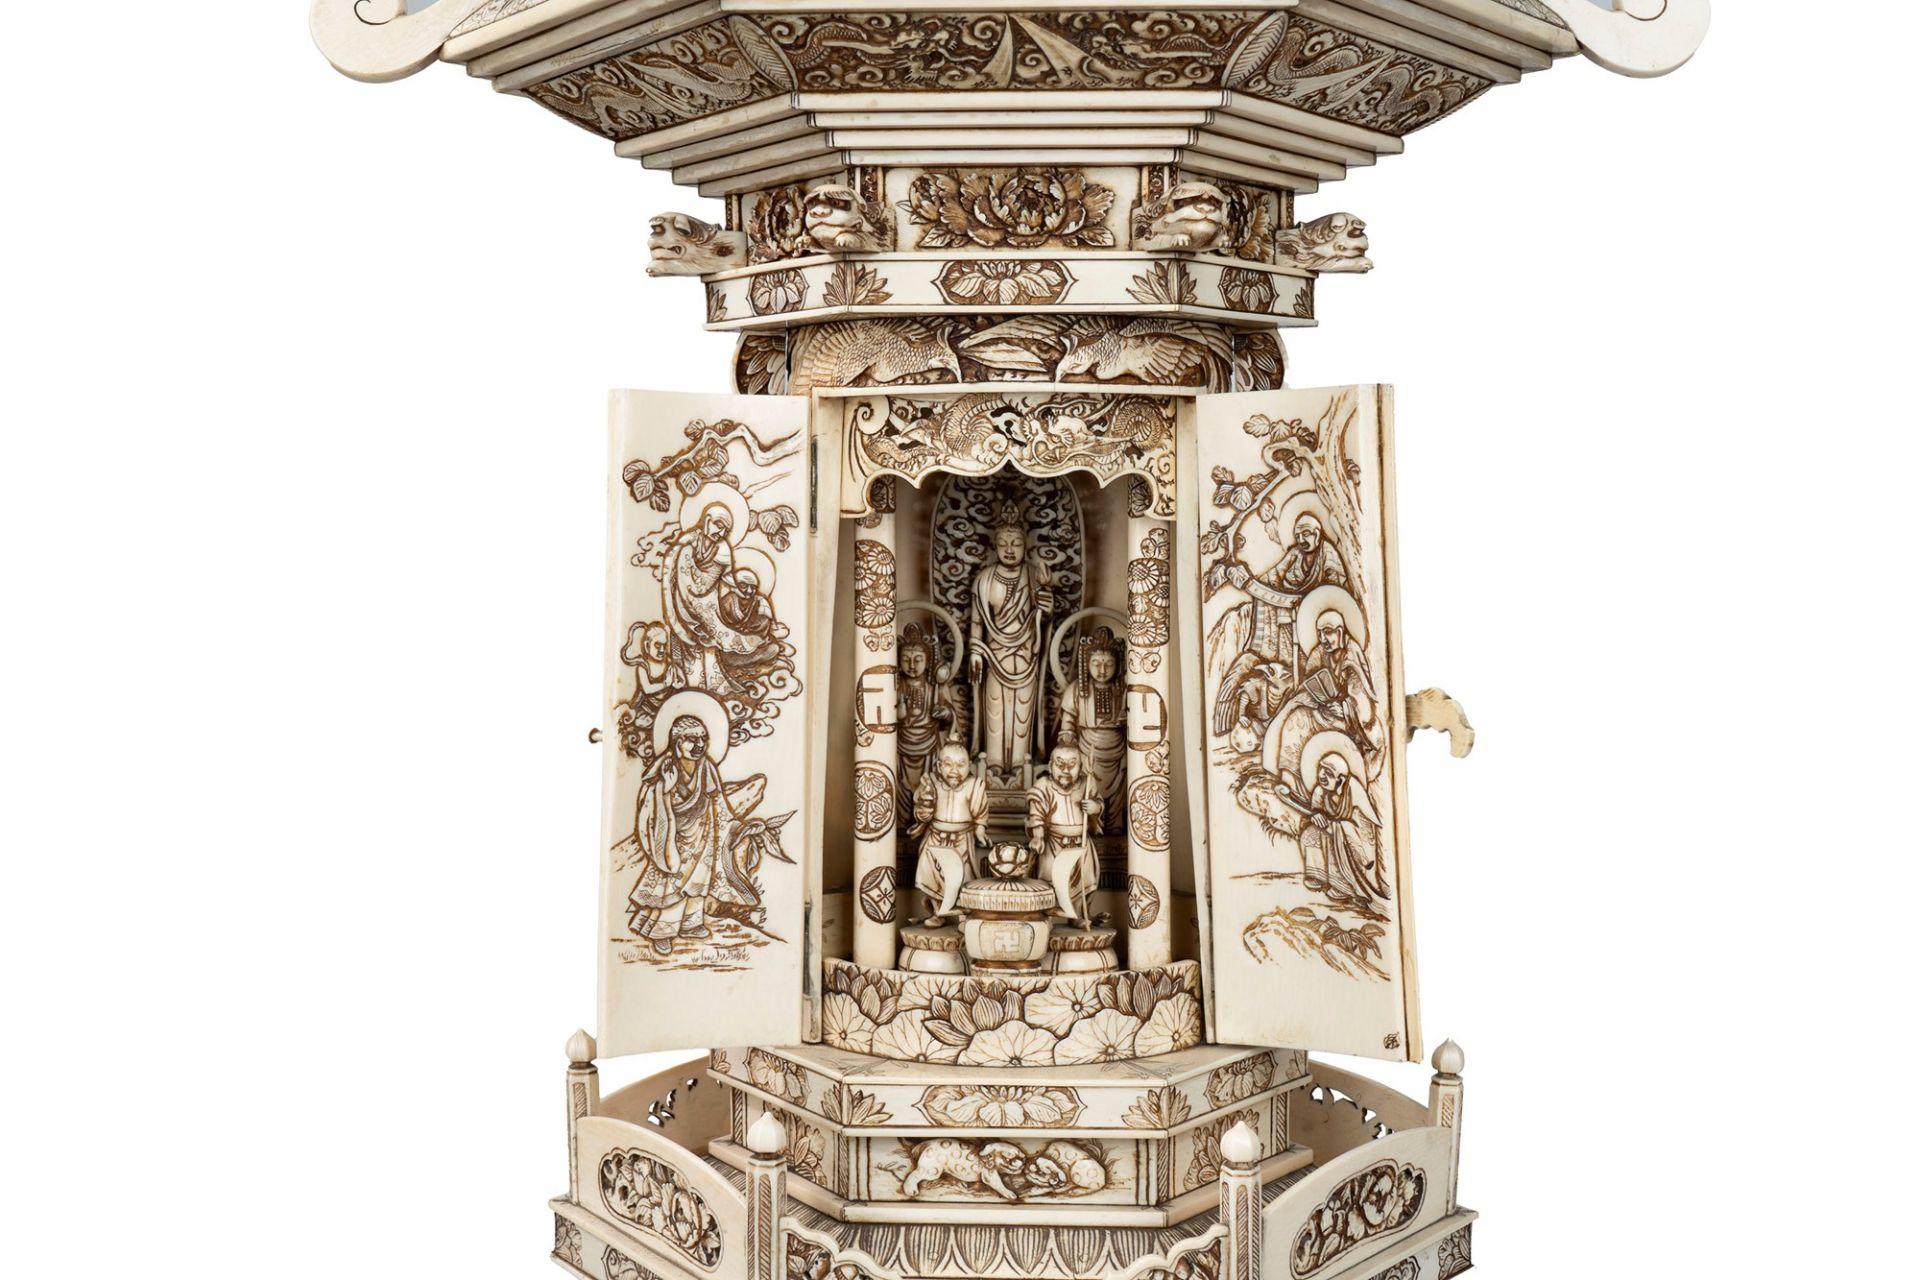 AN IMPORTANT IVORY PAGODA, Japan, Meiji period (1868-1912) - Image 3 of 9